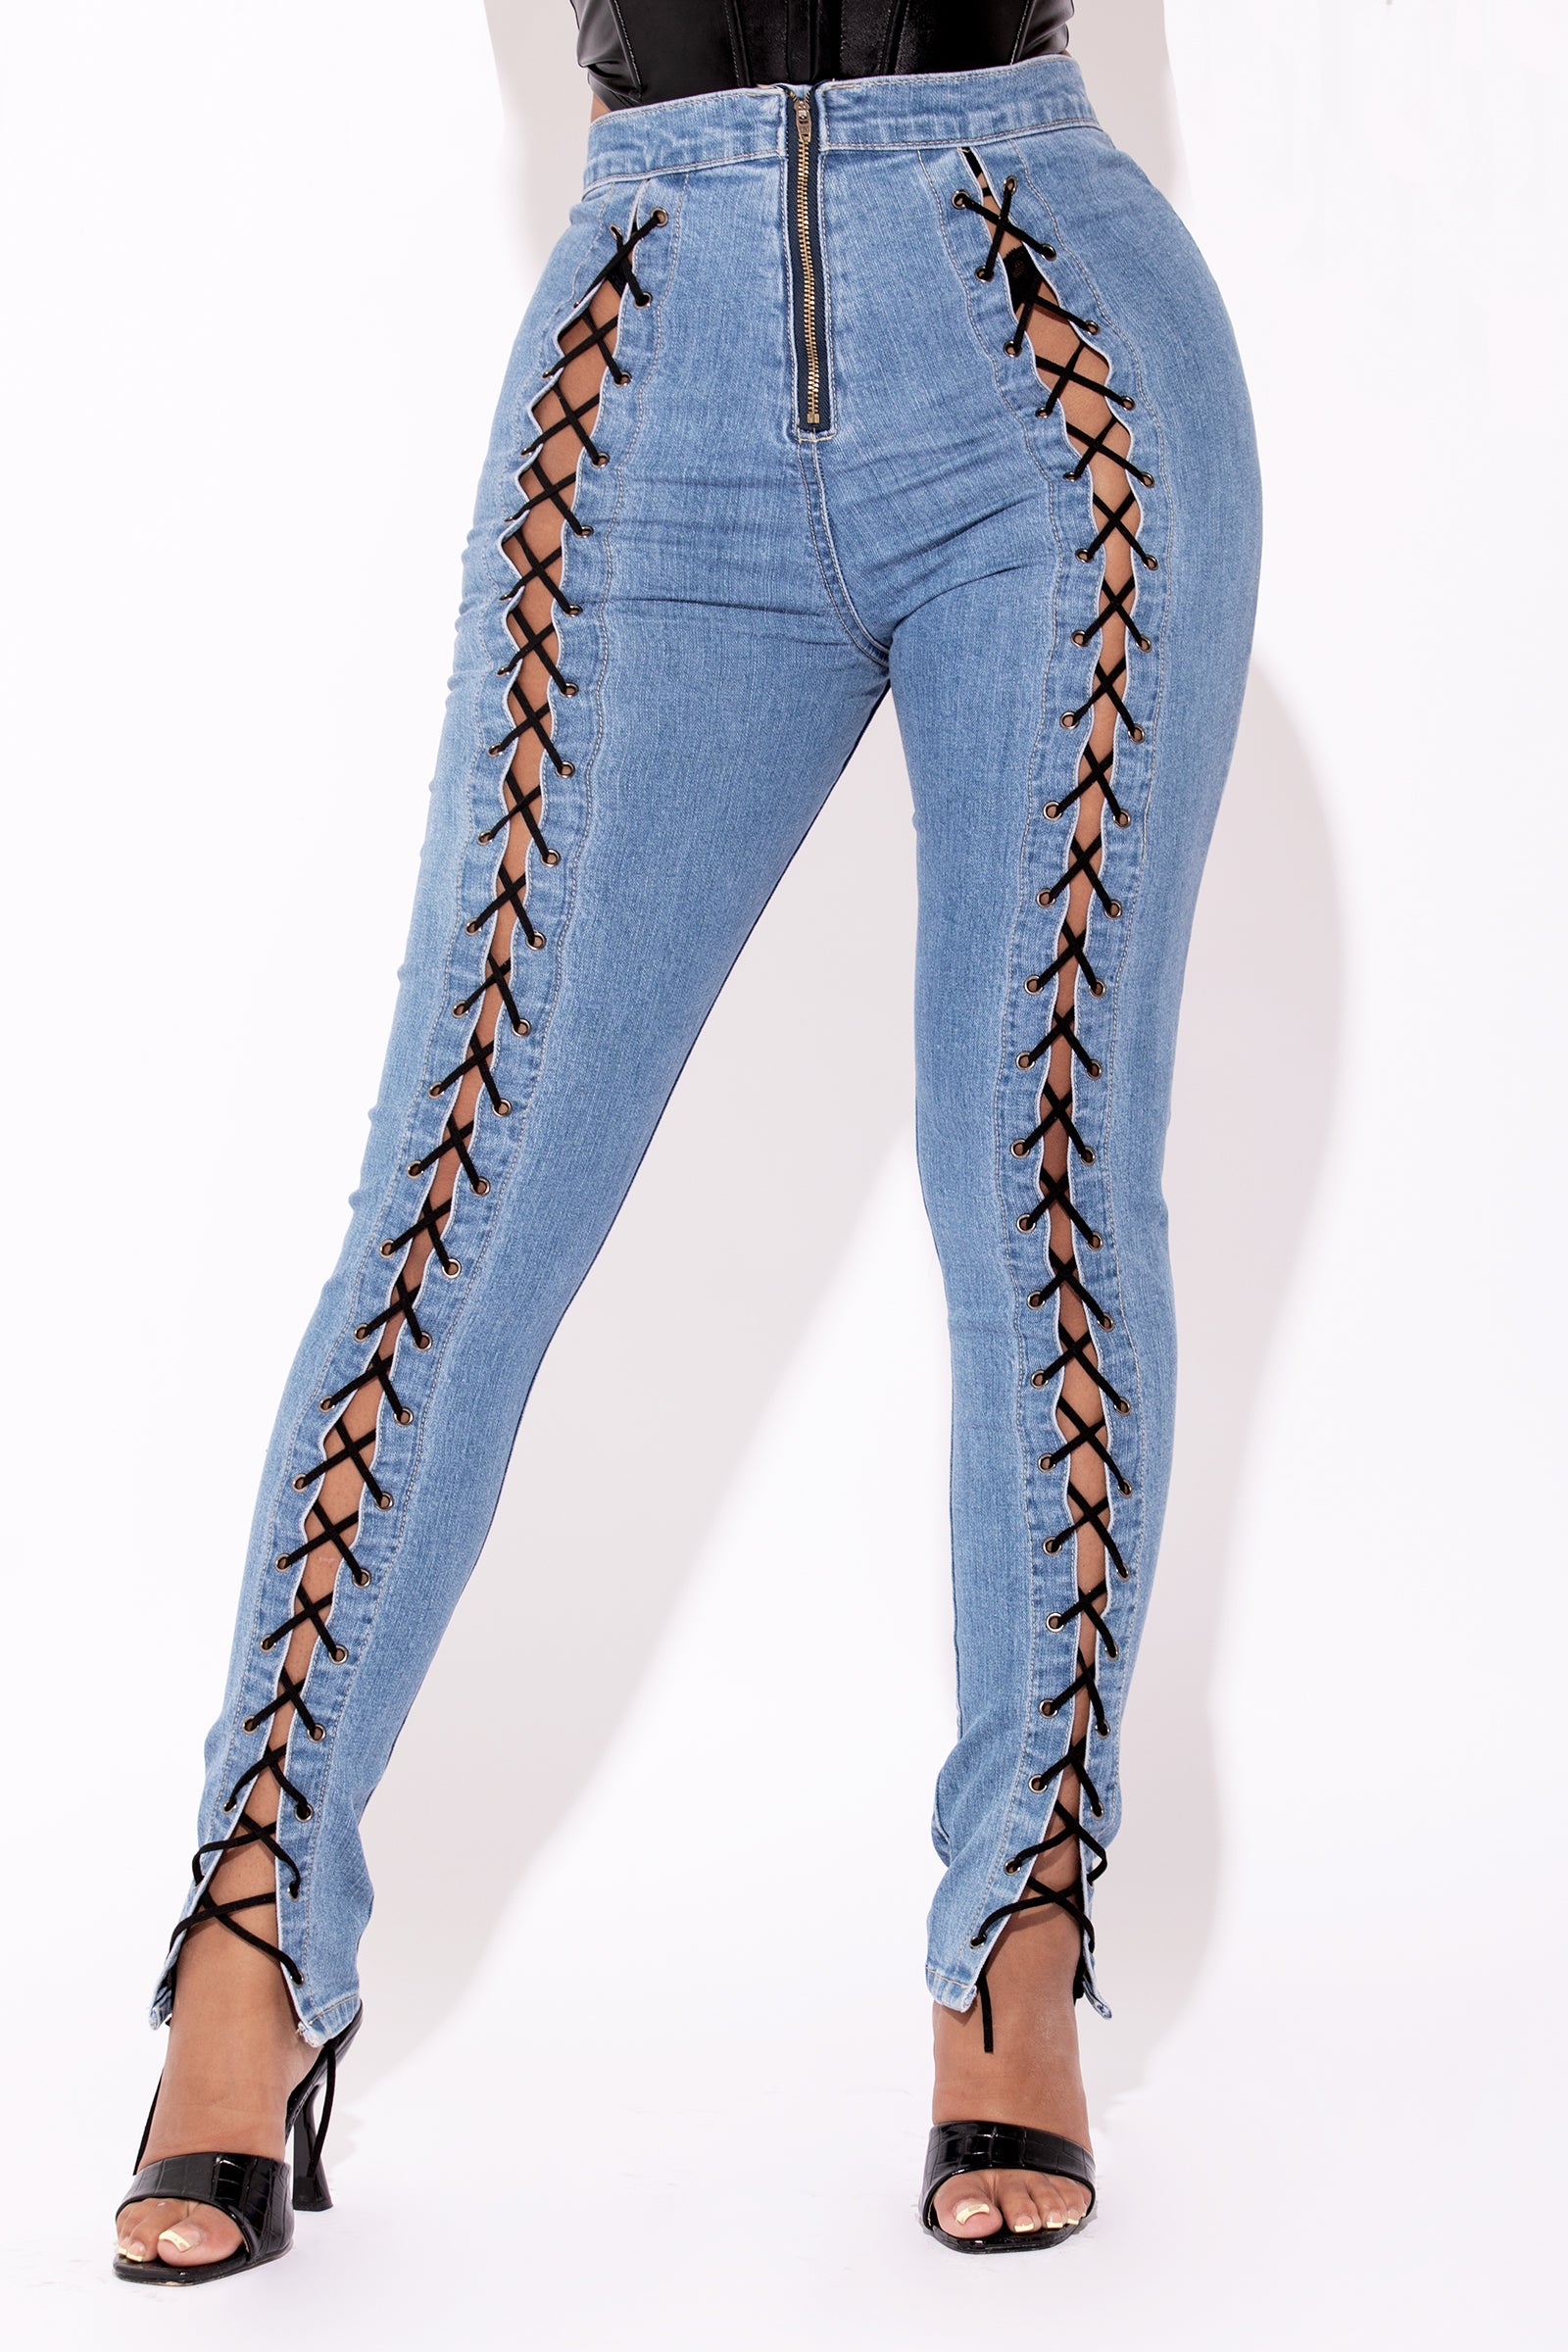 Ermanno Scervino Cotton Denim Jeans Wwool Lace Patches, $318 | LUISAVIAROMA  | Lookastic